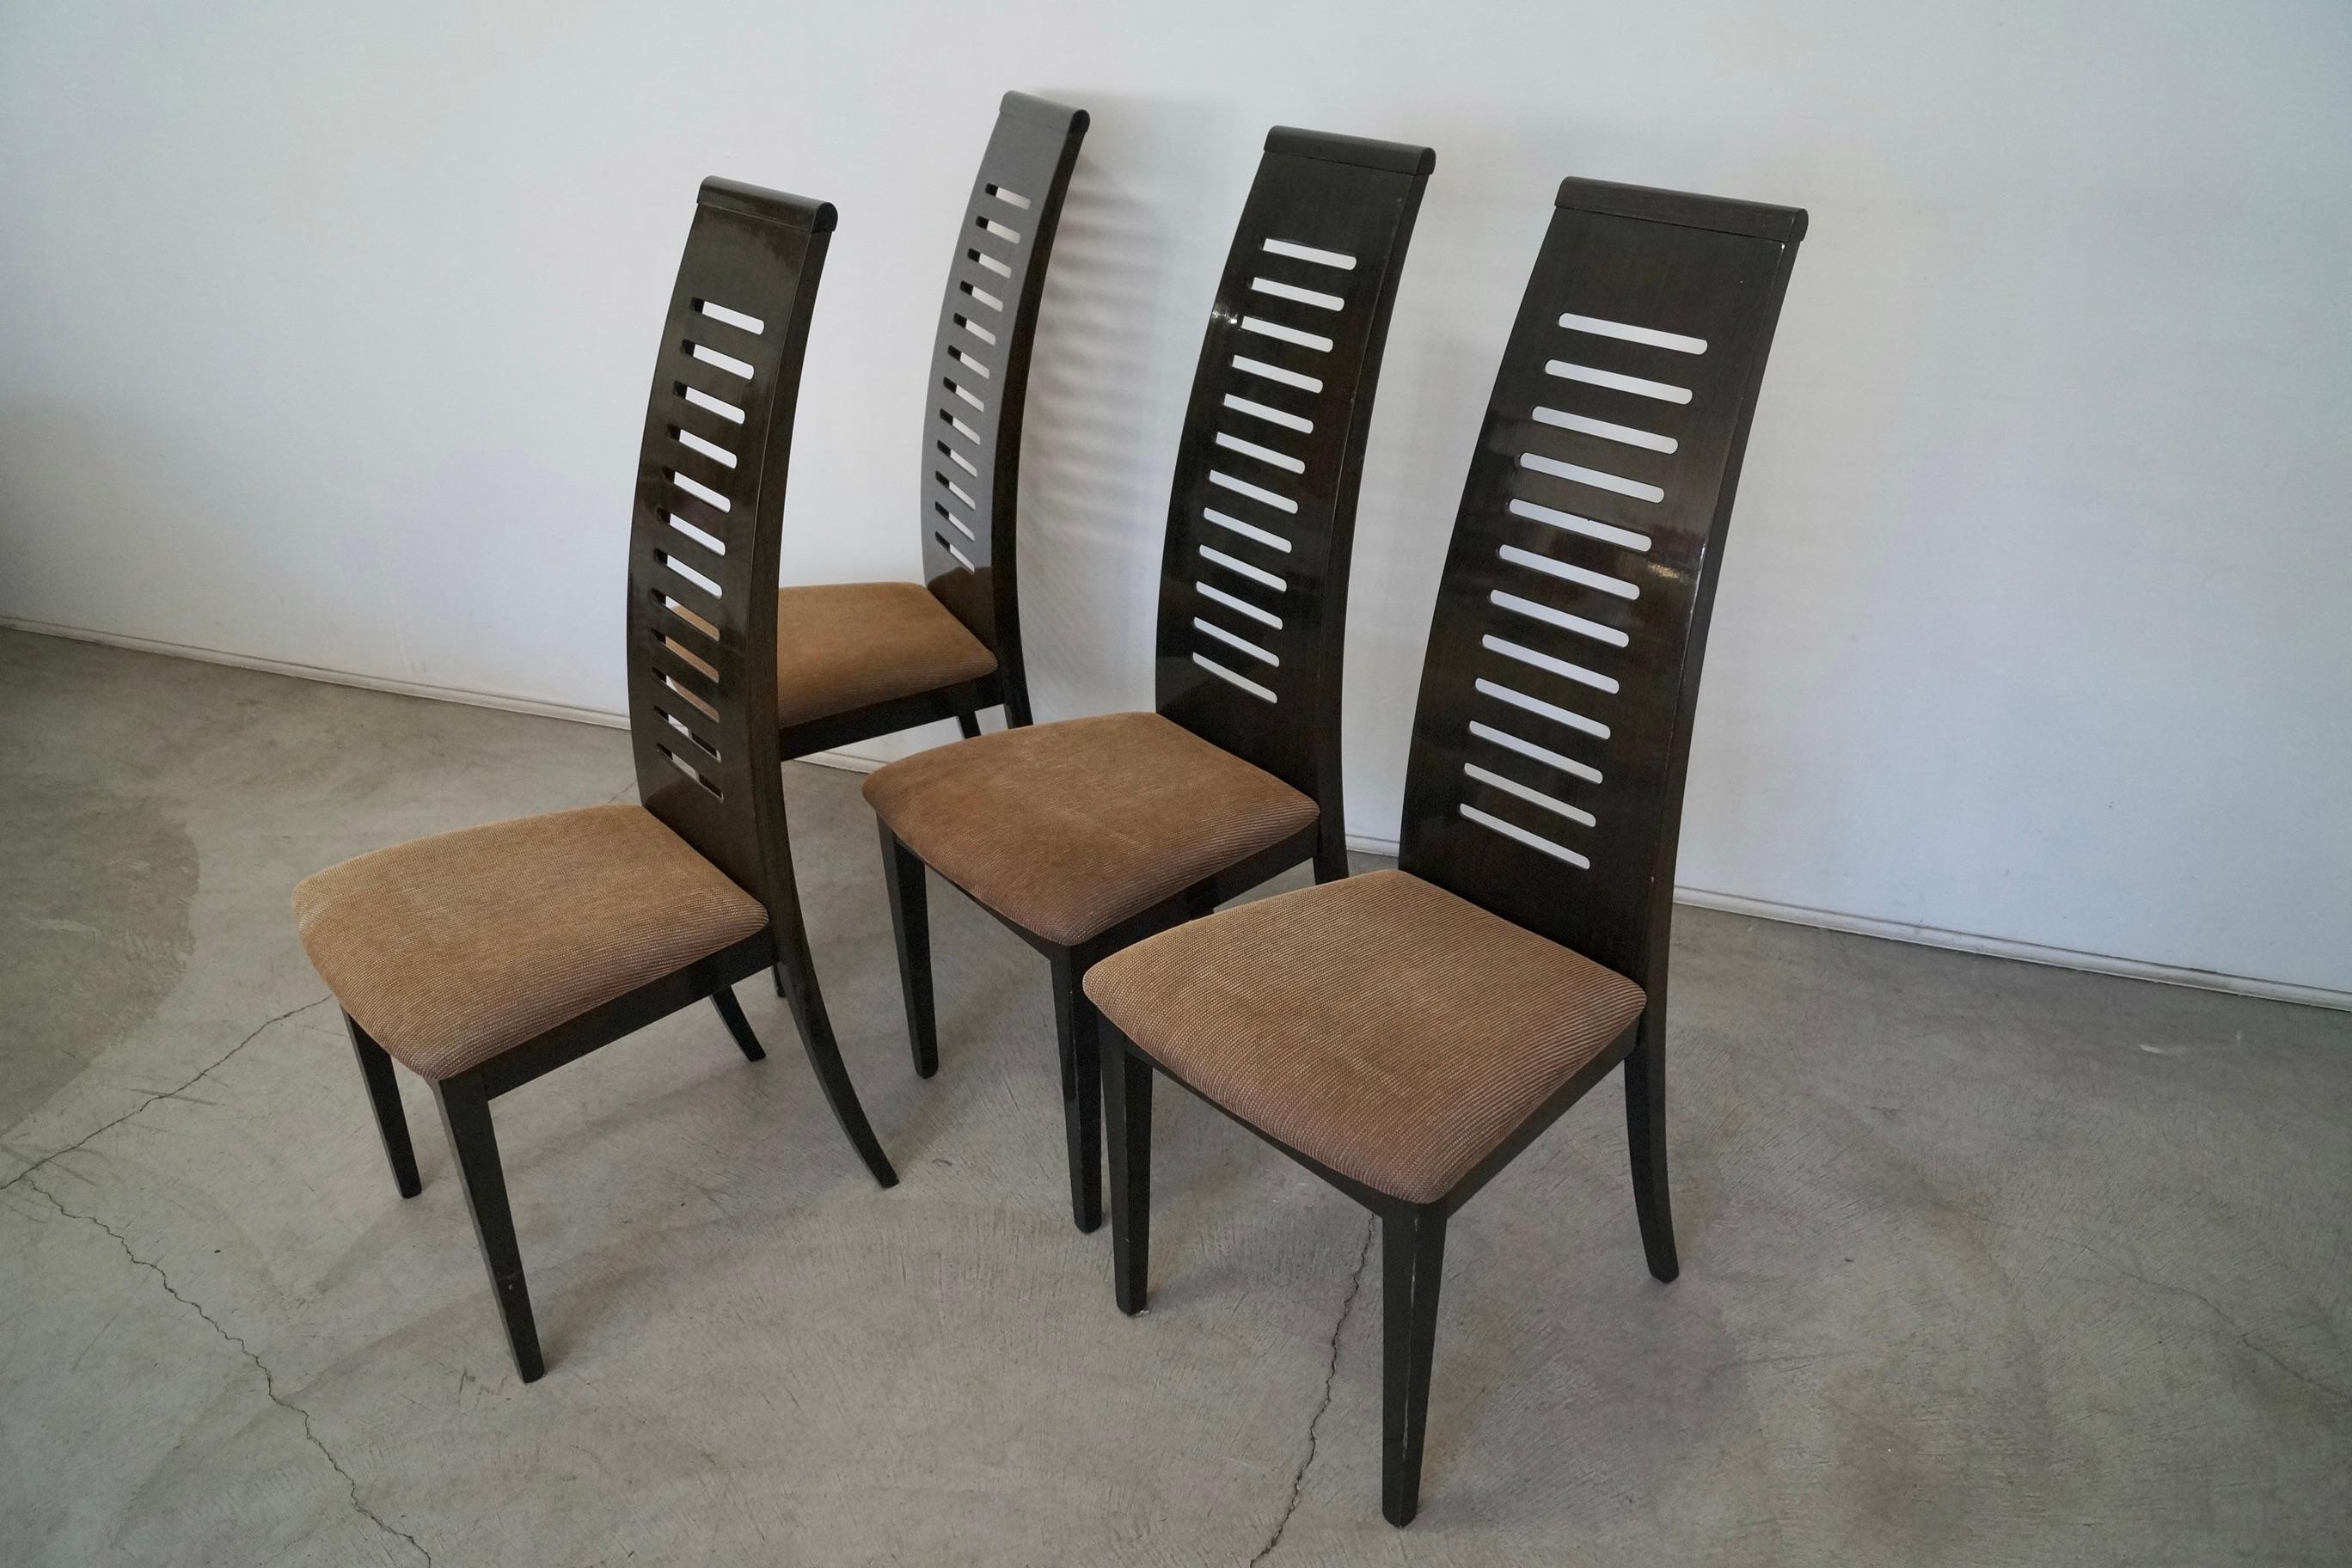 Postmodern Ello Furniture Pietro Costantini Dining Chairs - Set of 6 For Sale 4